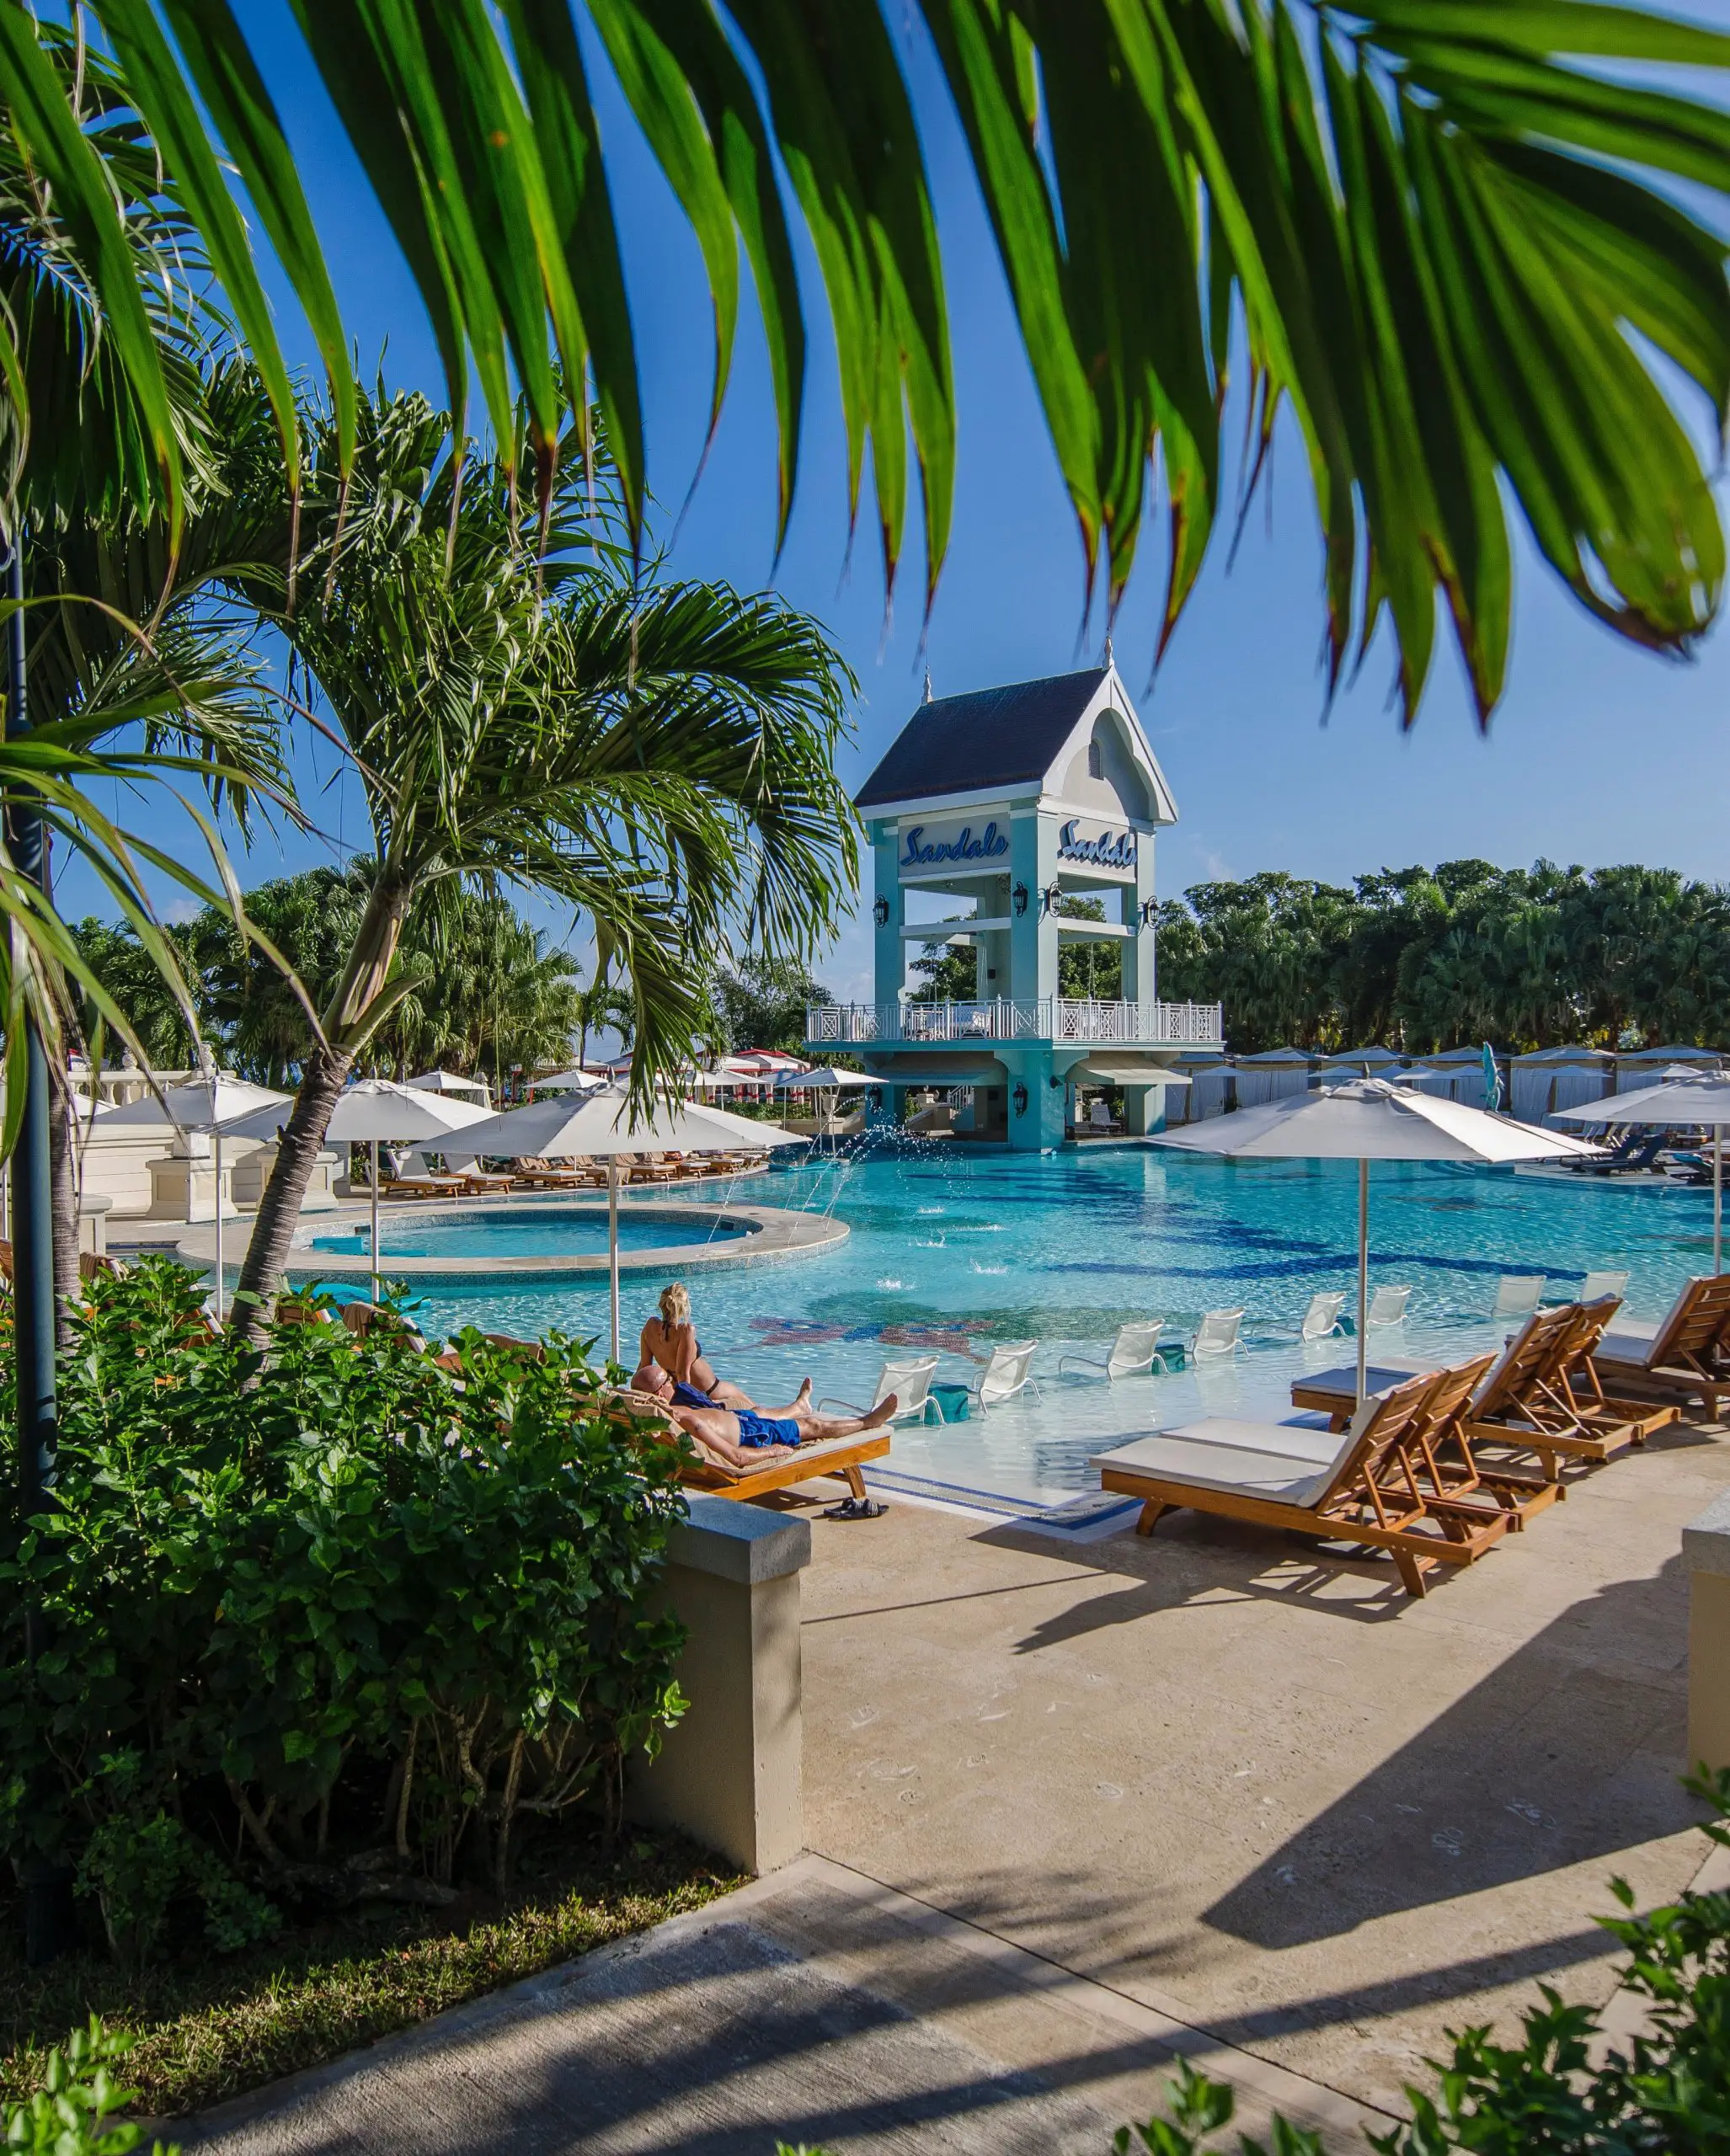 Sandals Ochi Beach Resort offers unsurpassed privacy when you want a ...